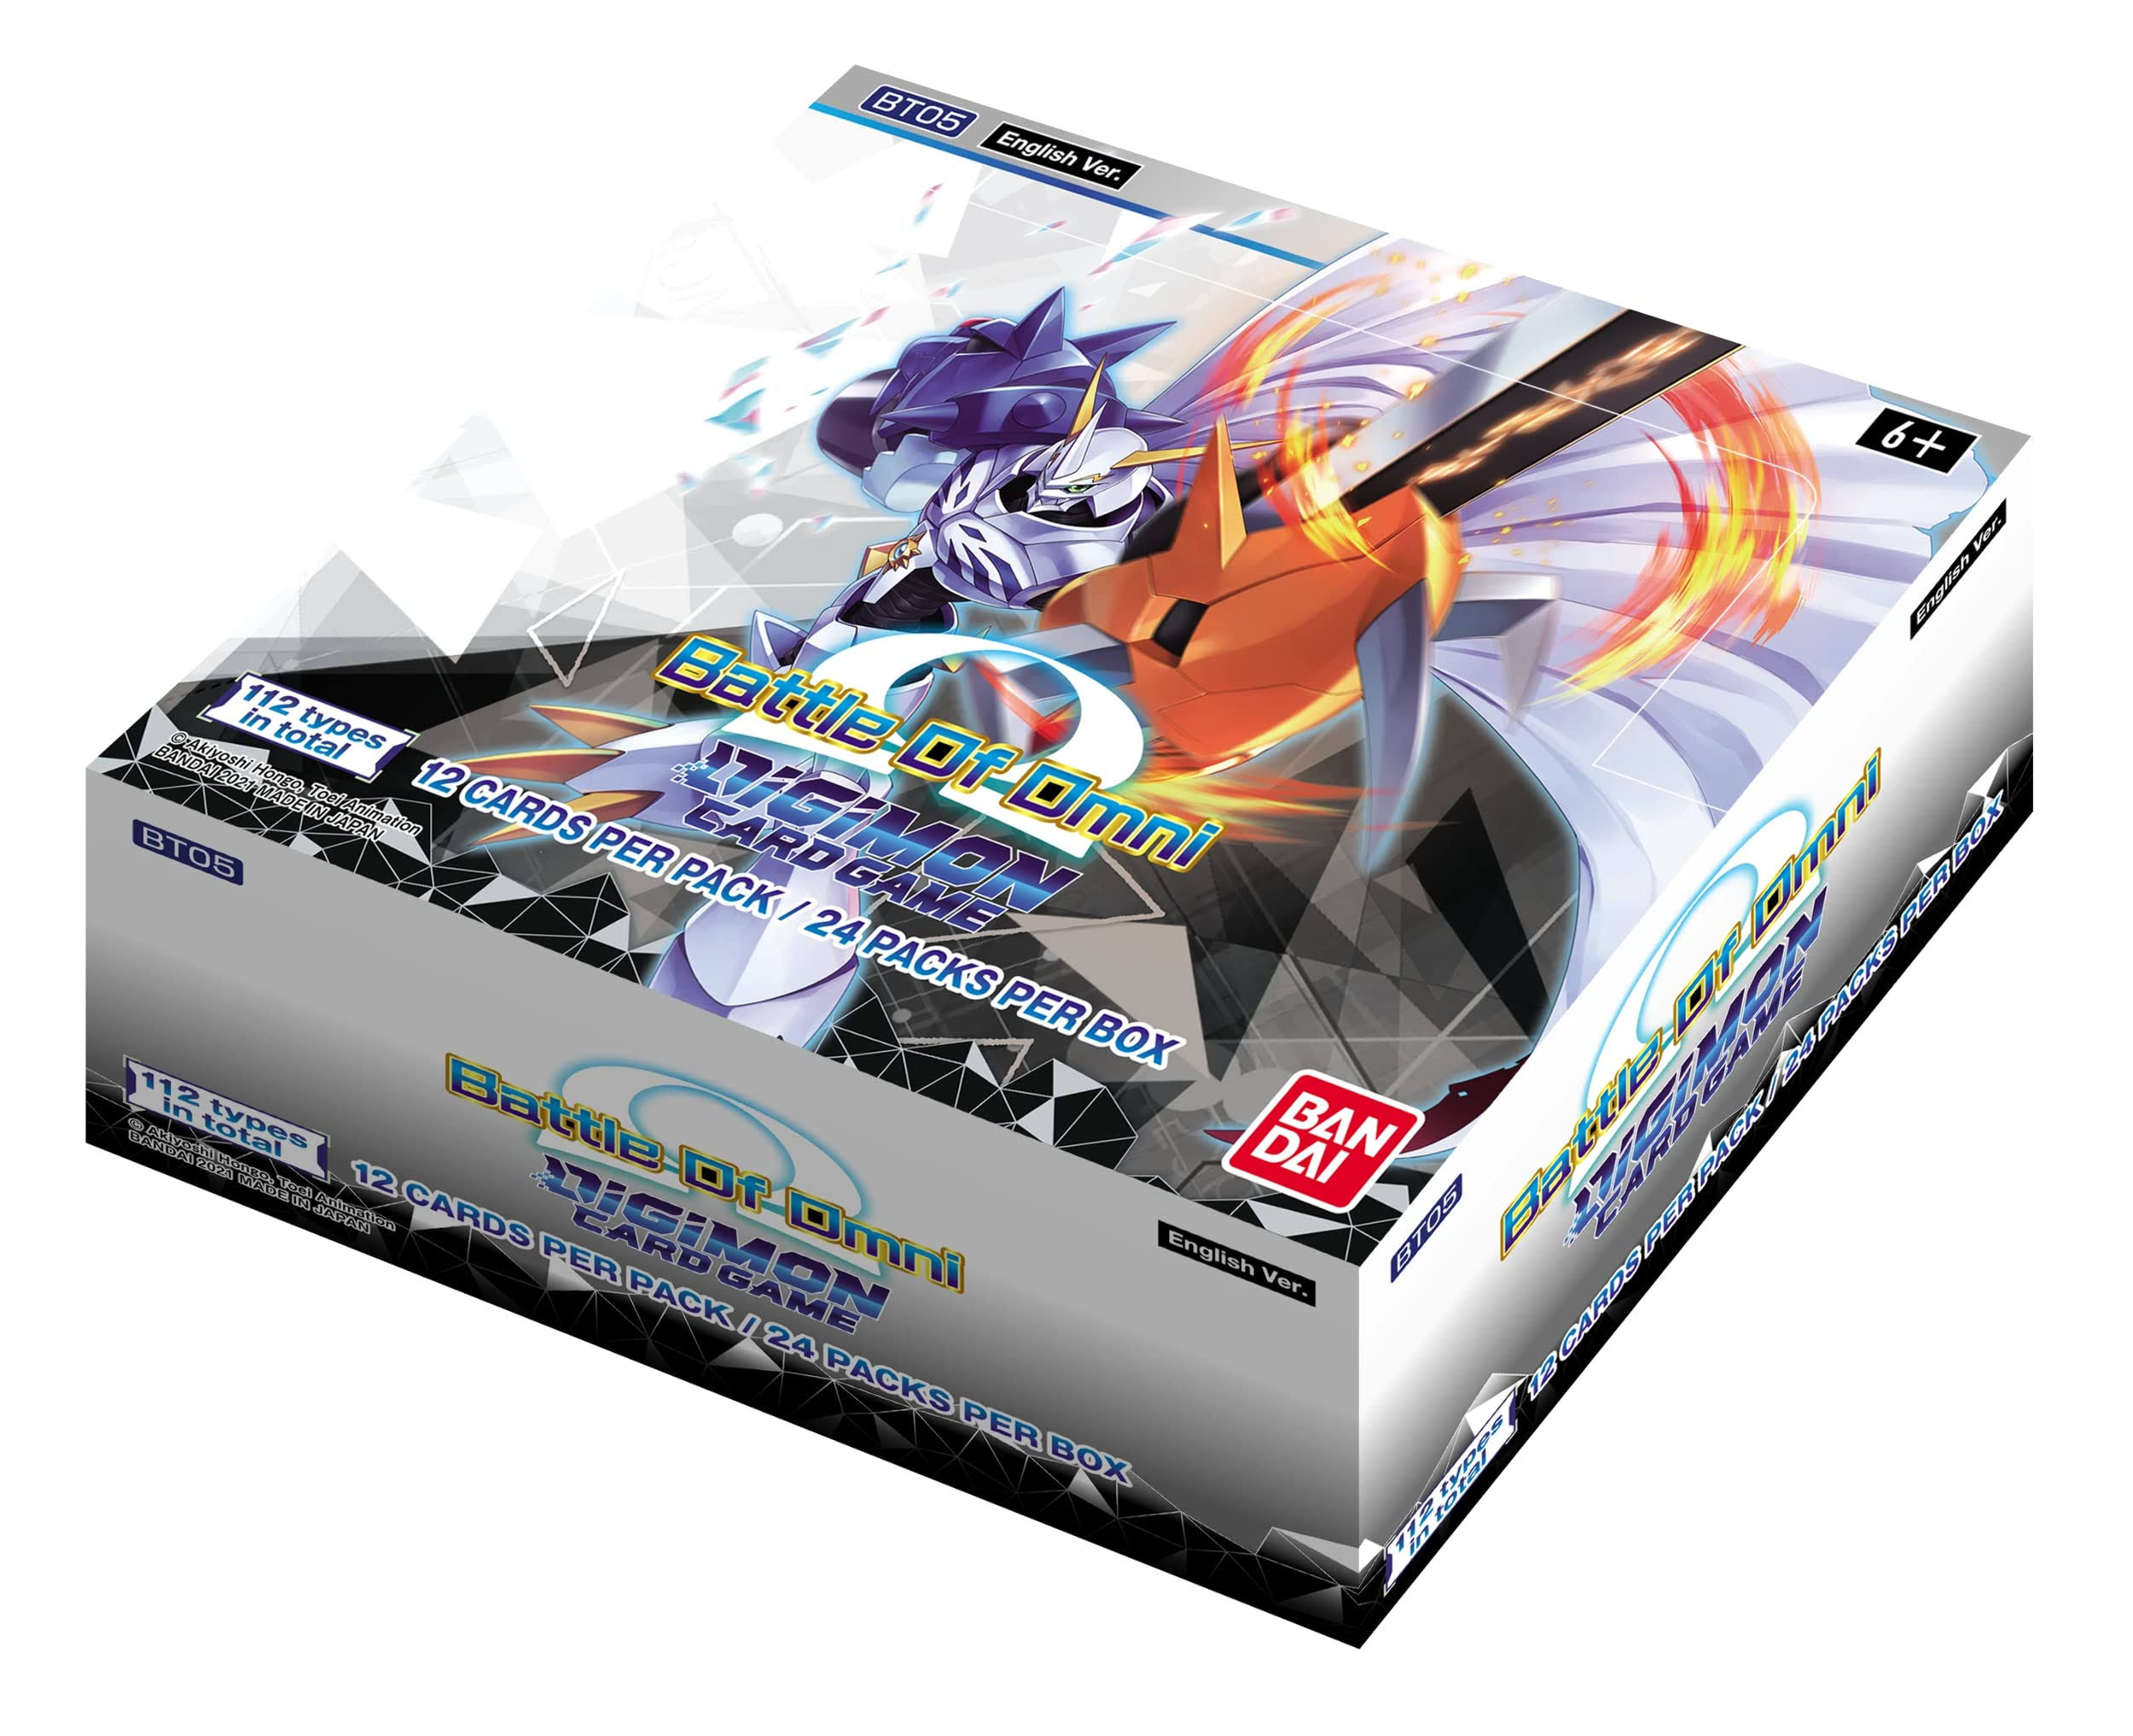 Digimon Card Game: Battle of Omni (BT05) Booster Pack